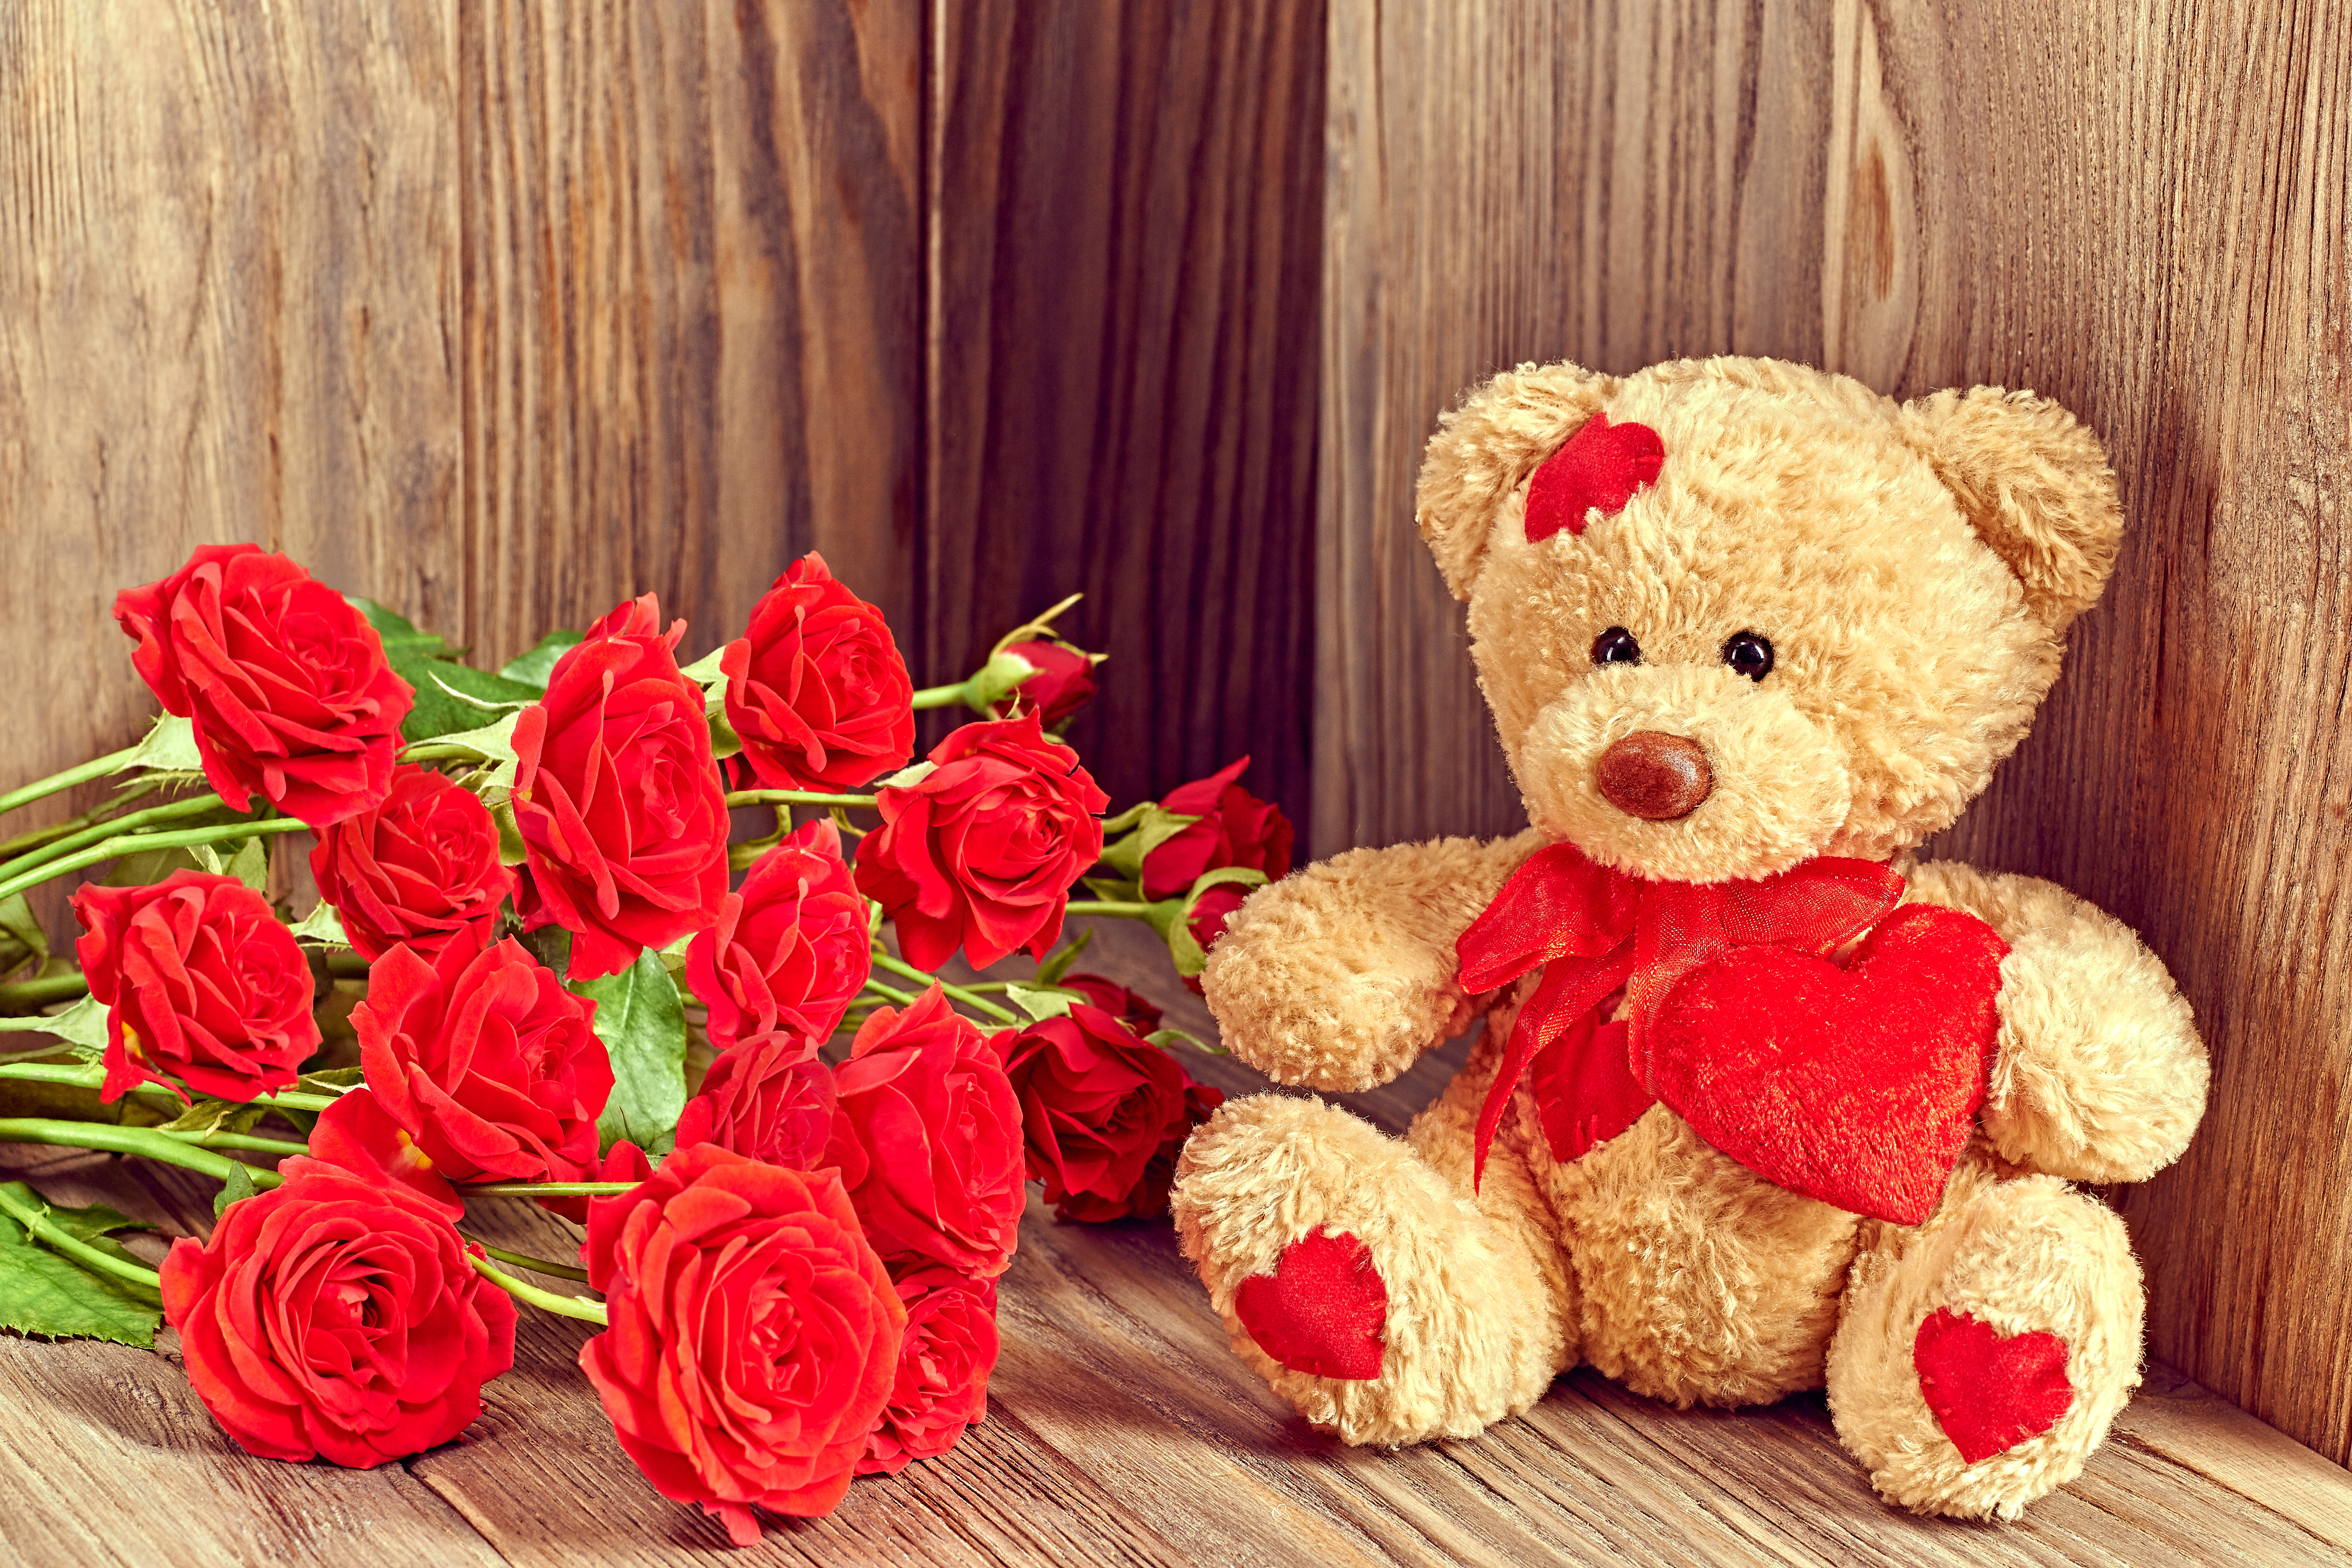 teddy bear, holiday, valentine's day, flower, love, red rose, rose